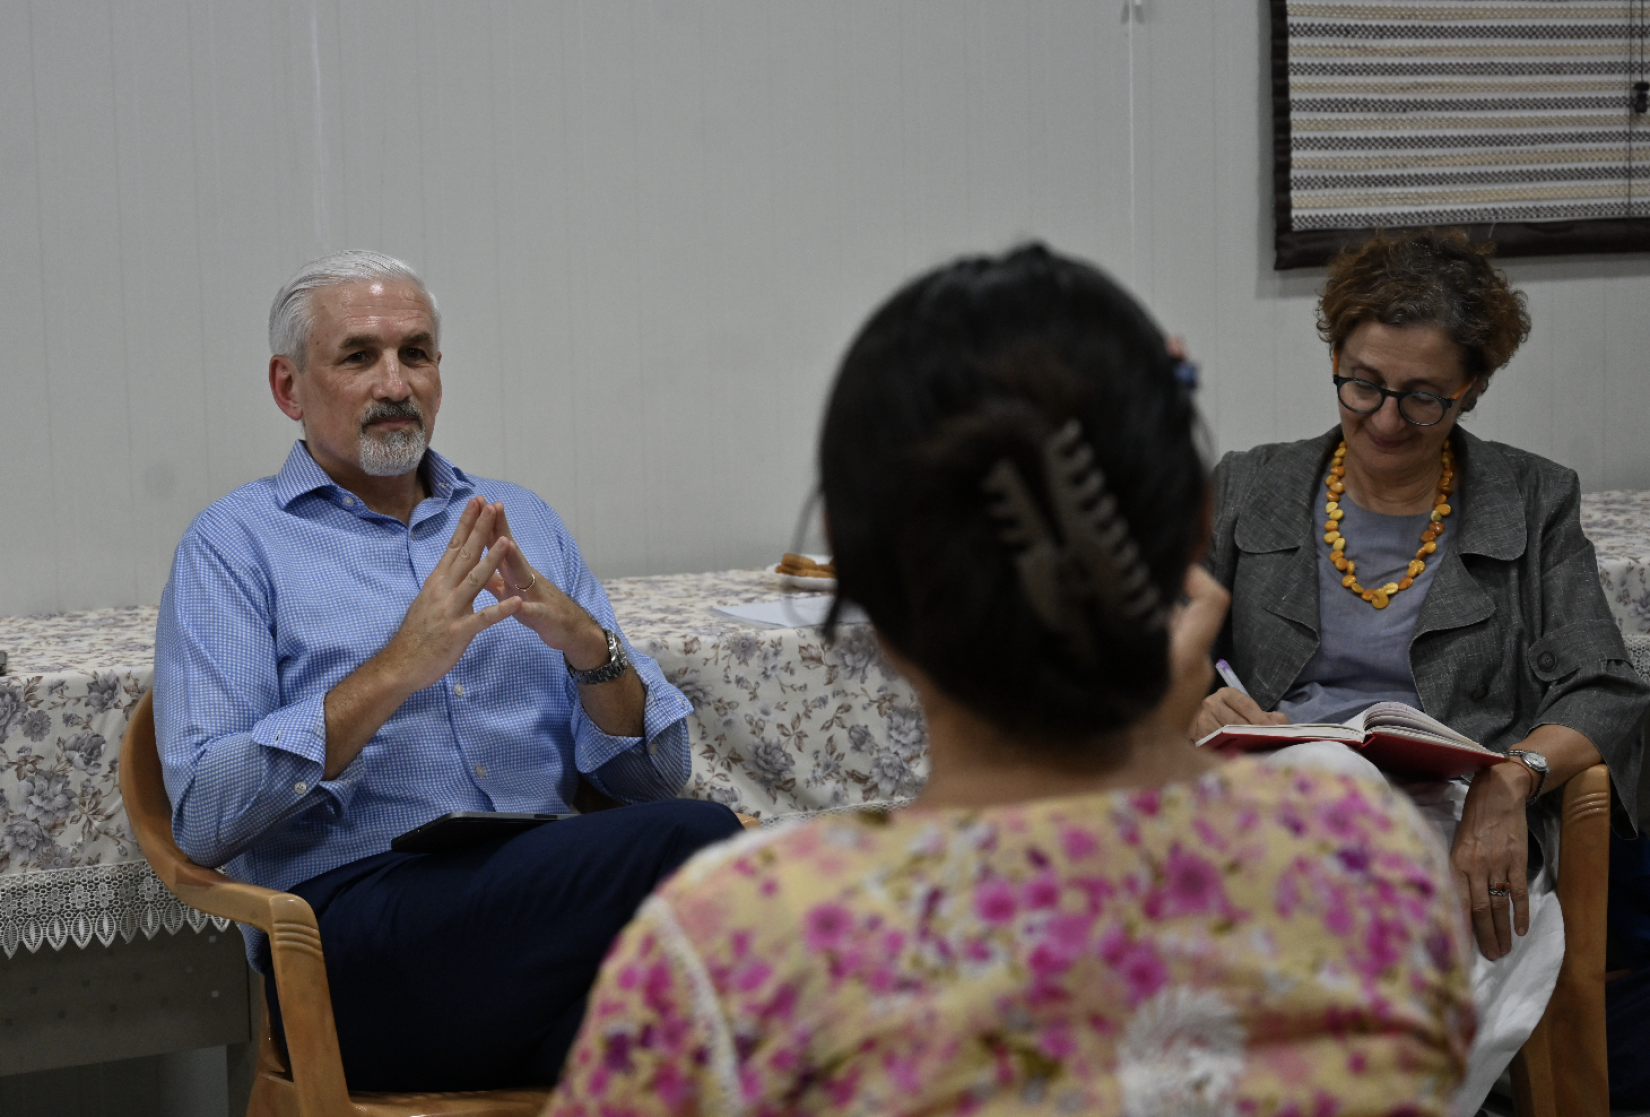 A young asylum seeker talks about challenges faced by refugee youth during an interaction with UN Resident Coordinator in India Shombi Sharp and Areti Sianni, Chief of Mission, UNHCR India in New Delhi. 